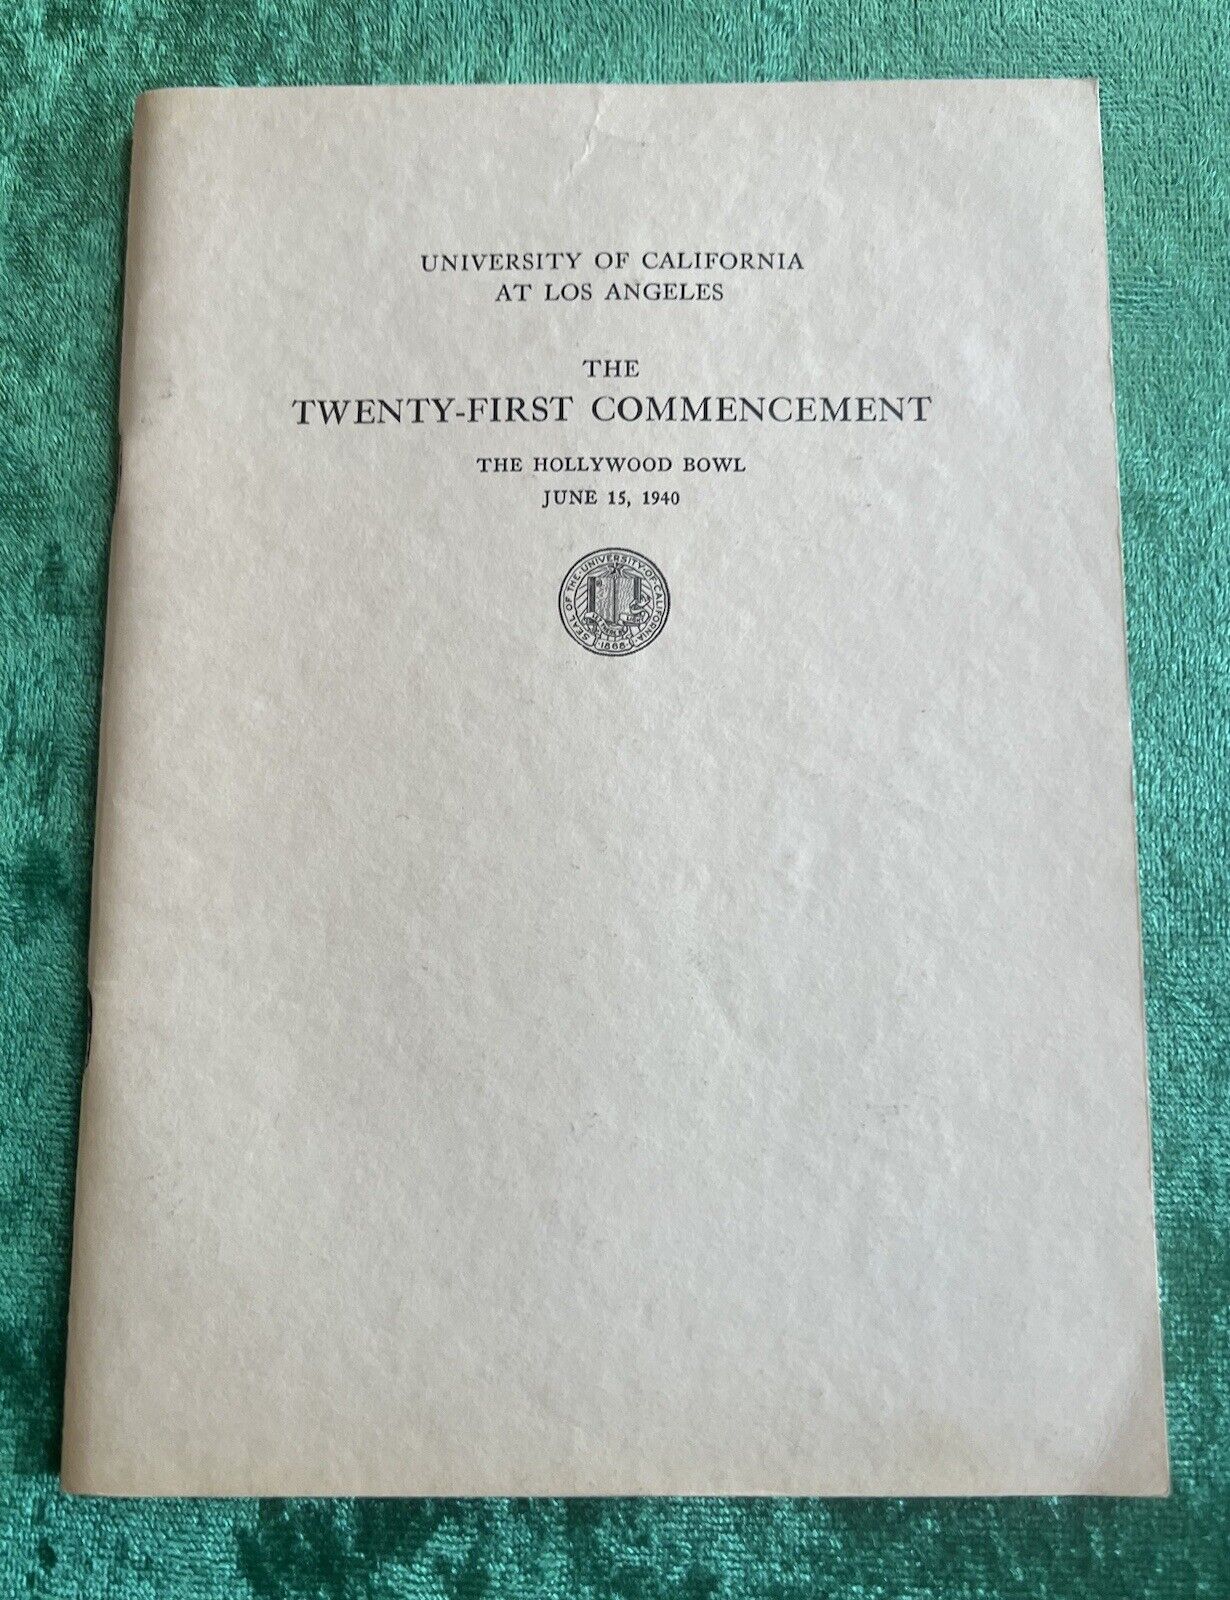 Official 1940 UCLA 21st Graduation Commencement Program at The Hollywood Bowl